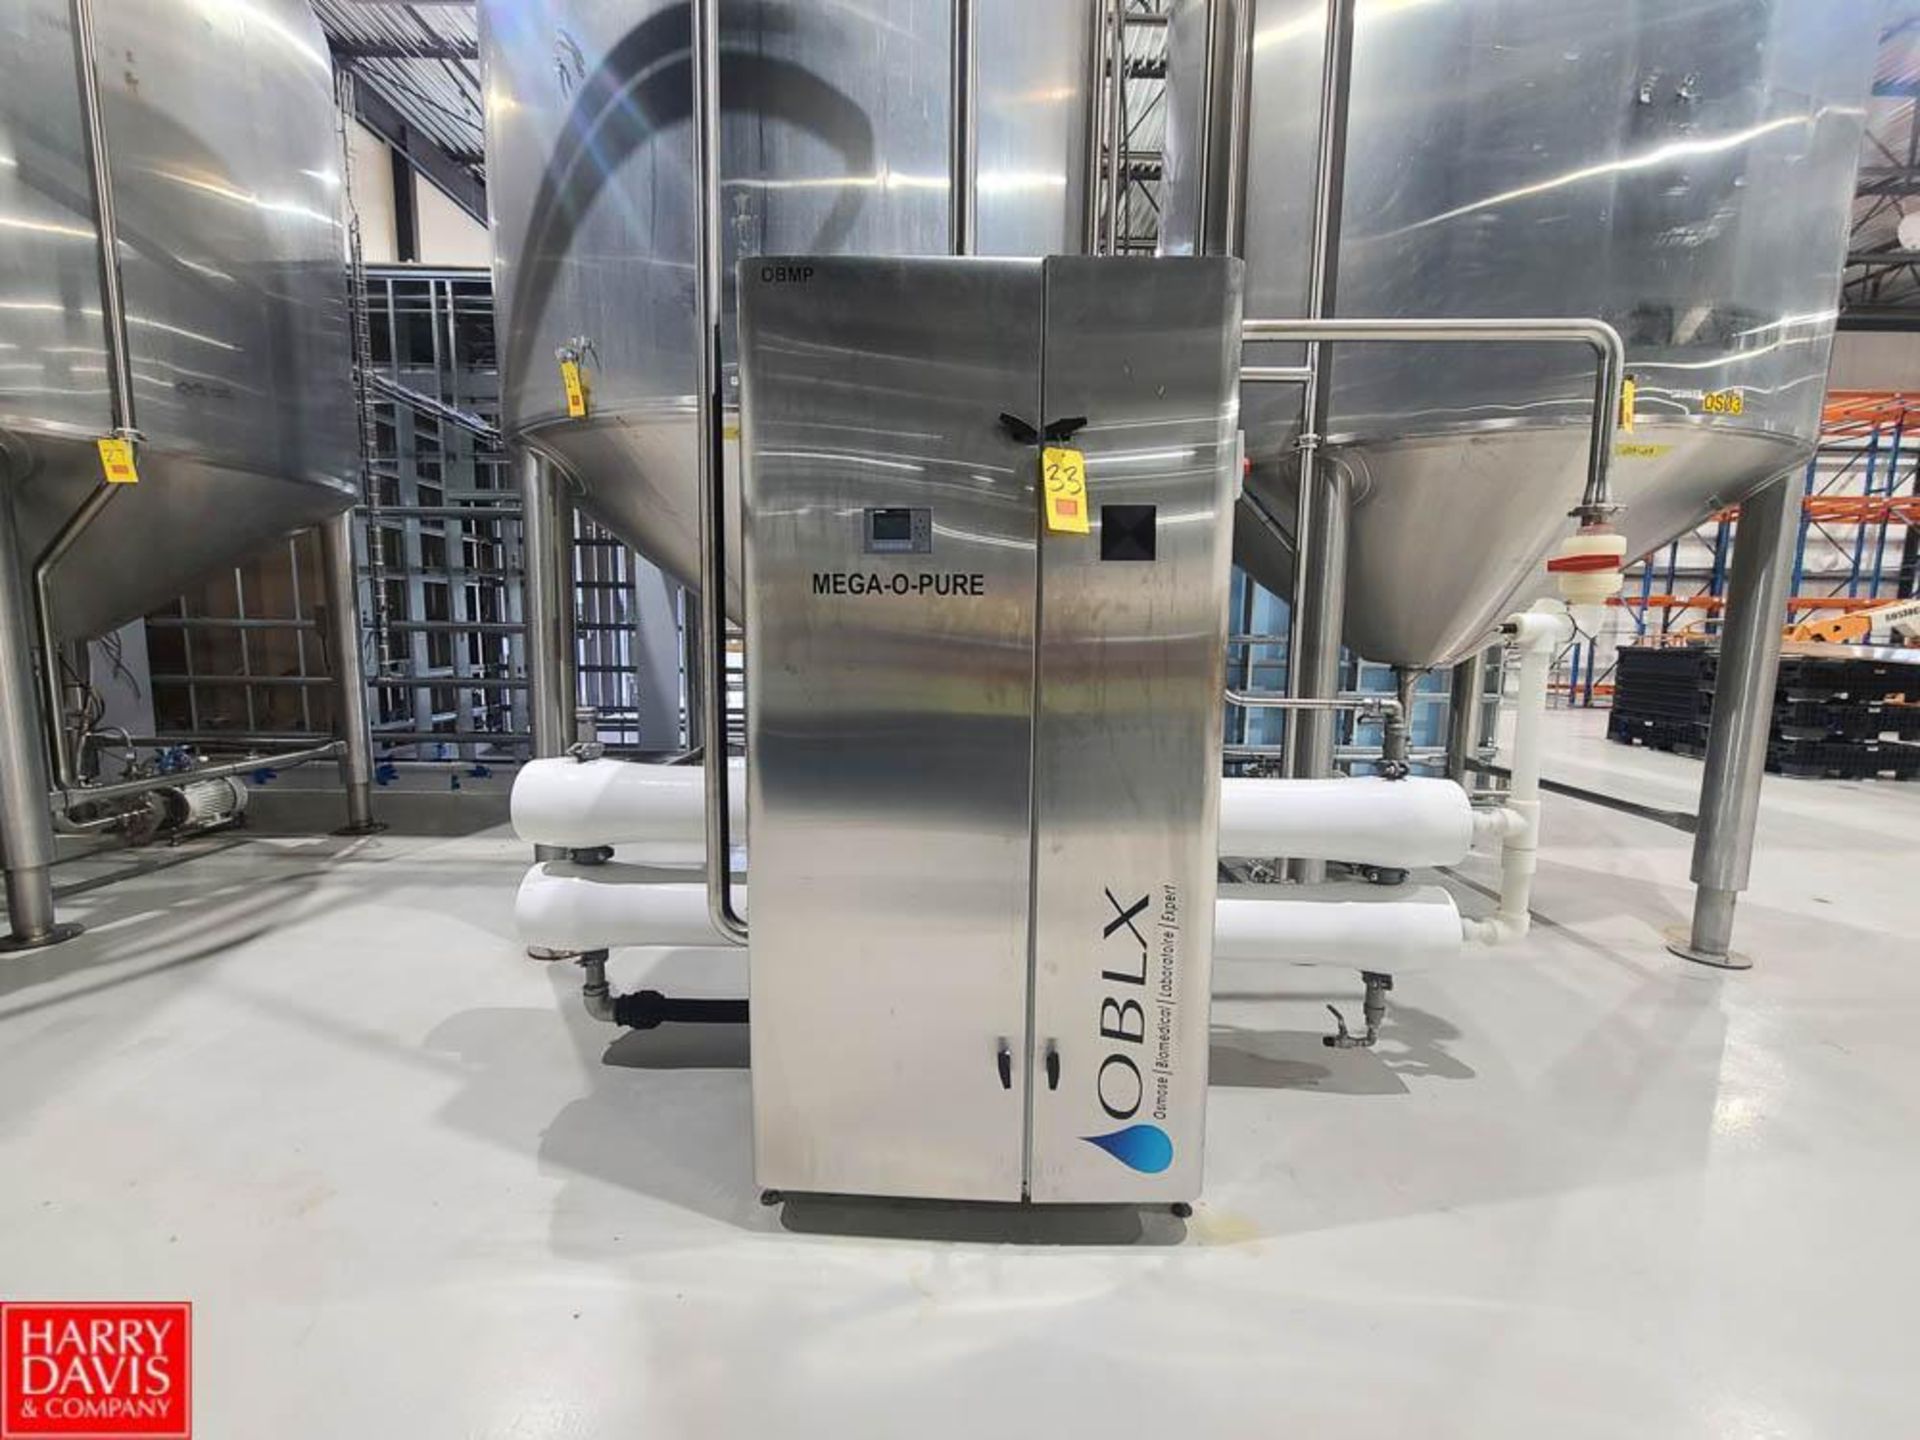 2021 OBLX 2-Tube Reverse Osmosis System, 60 LPM Model: MEGA-O-PURE with Pentair, Tubes, Pump,Siemens - Image 2 of 8